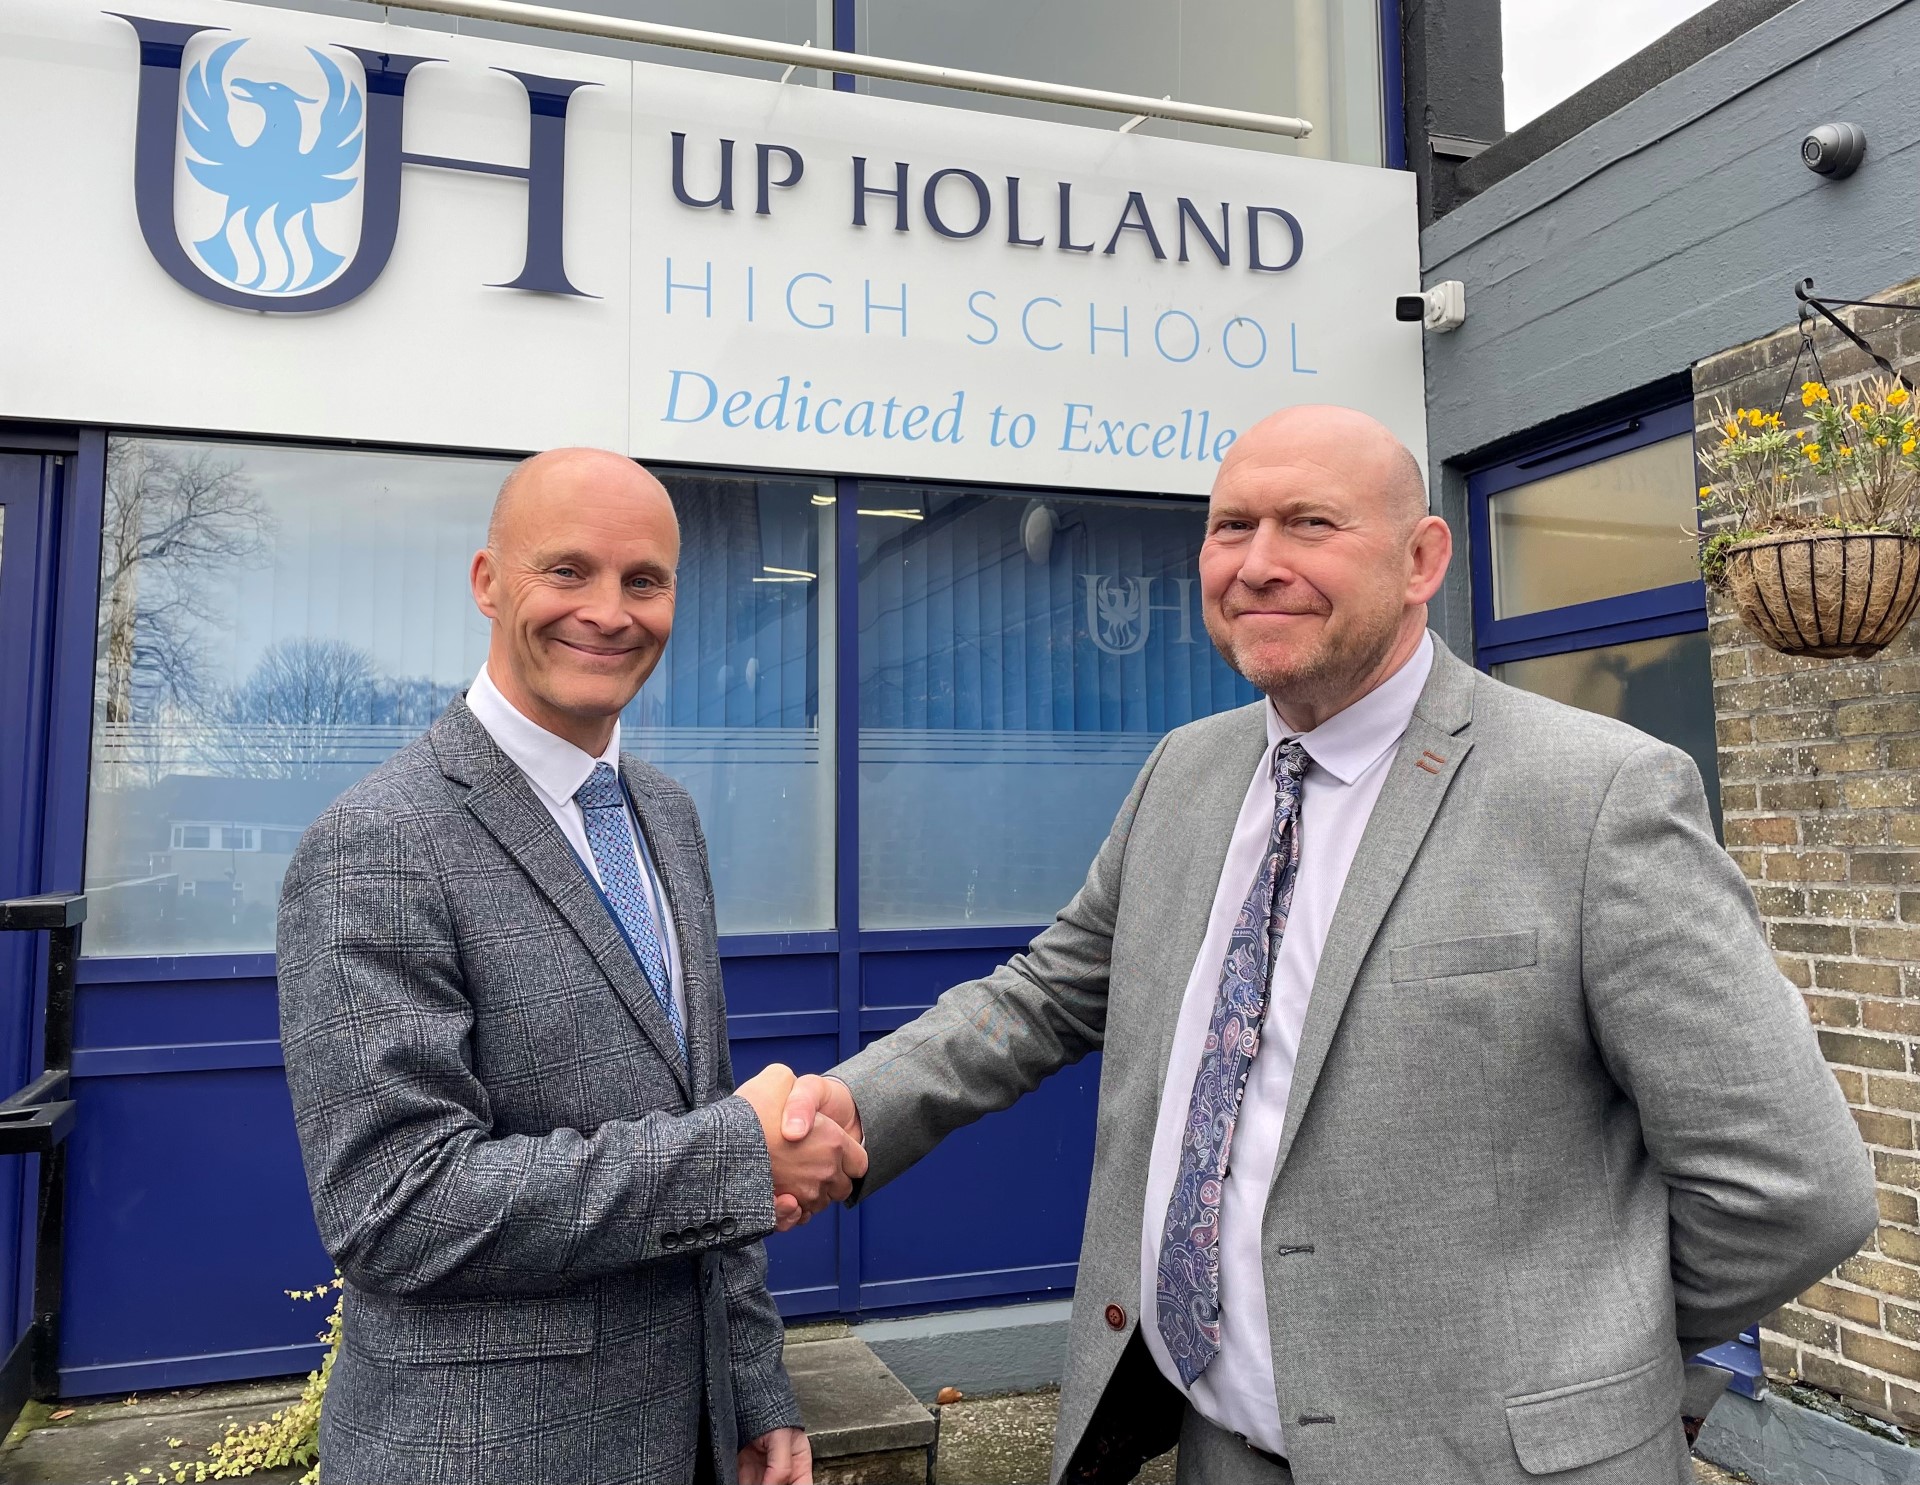 (L-R) Paul Scarborough, headteacher of Up Holland High School, with Ian Young, CEO of Everyone Matters Schools Trust